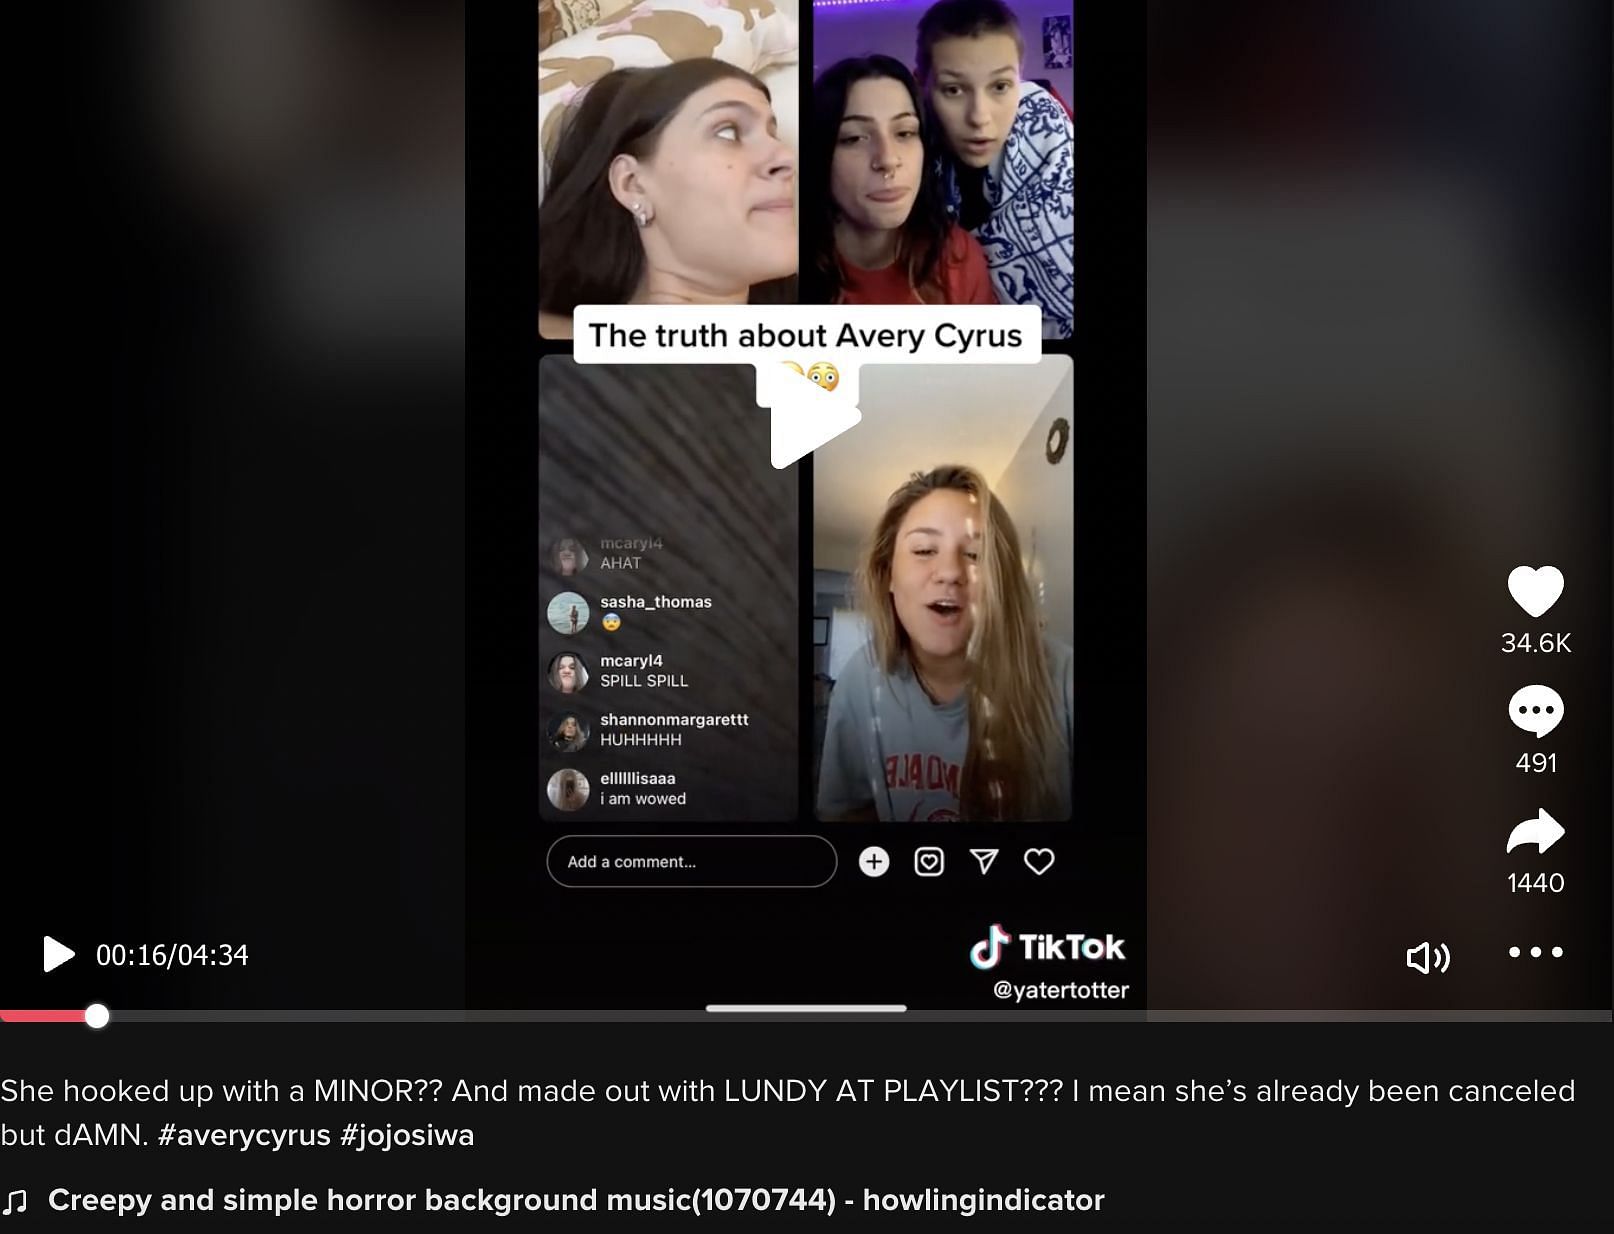 Netizens speculate that Avery made out with Lundy after being in a relationship with JoJo Siwa. (Image via TikTok)